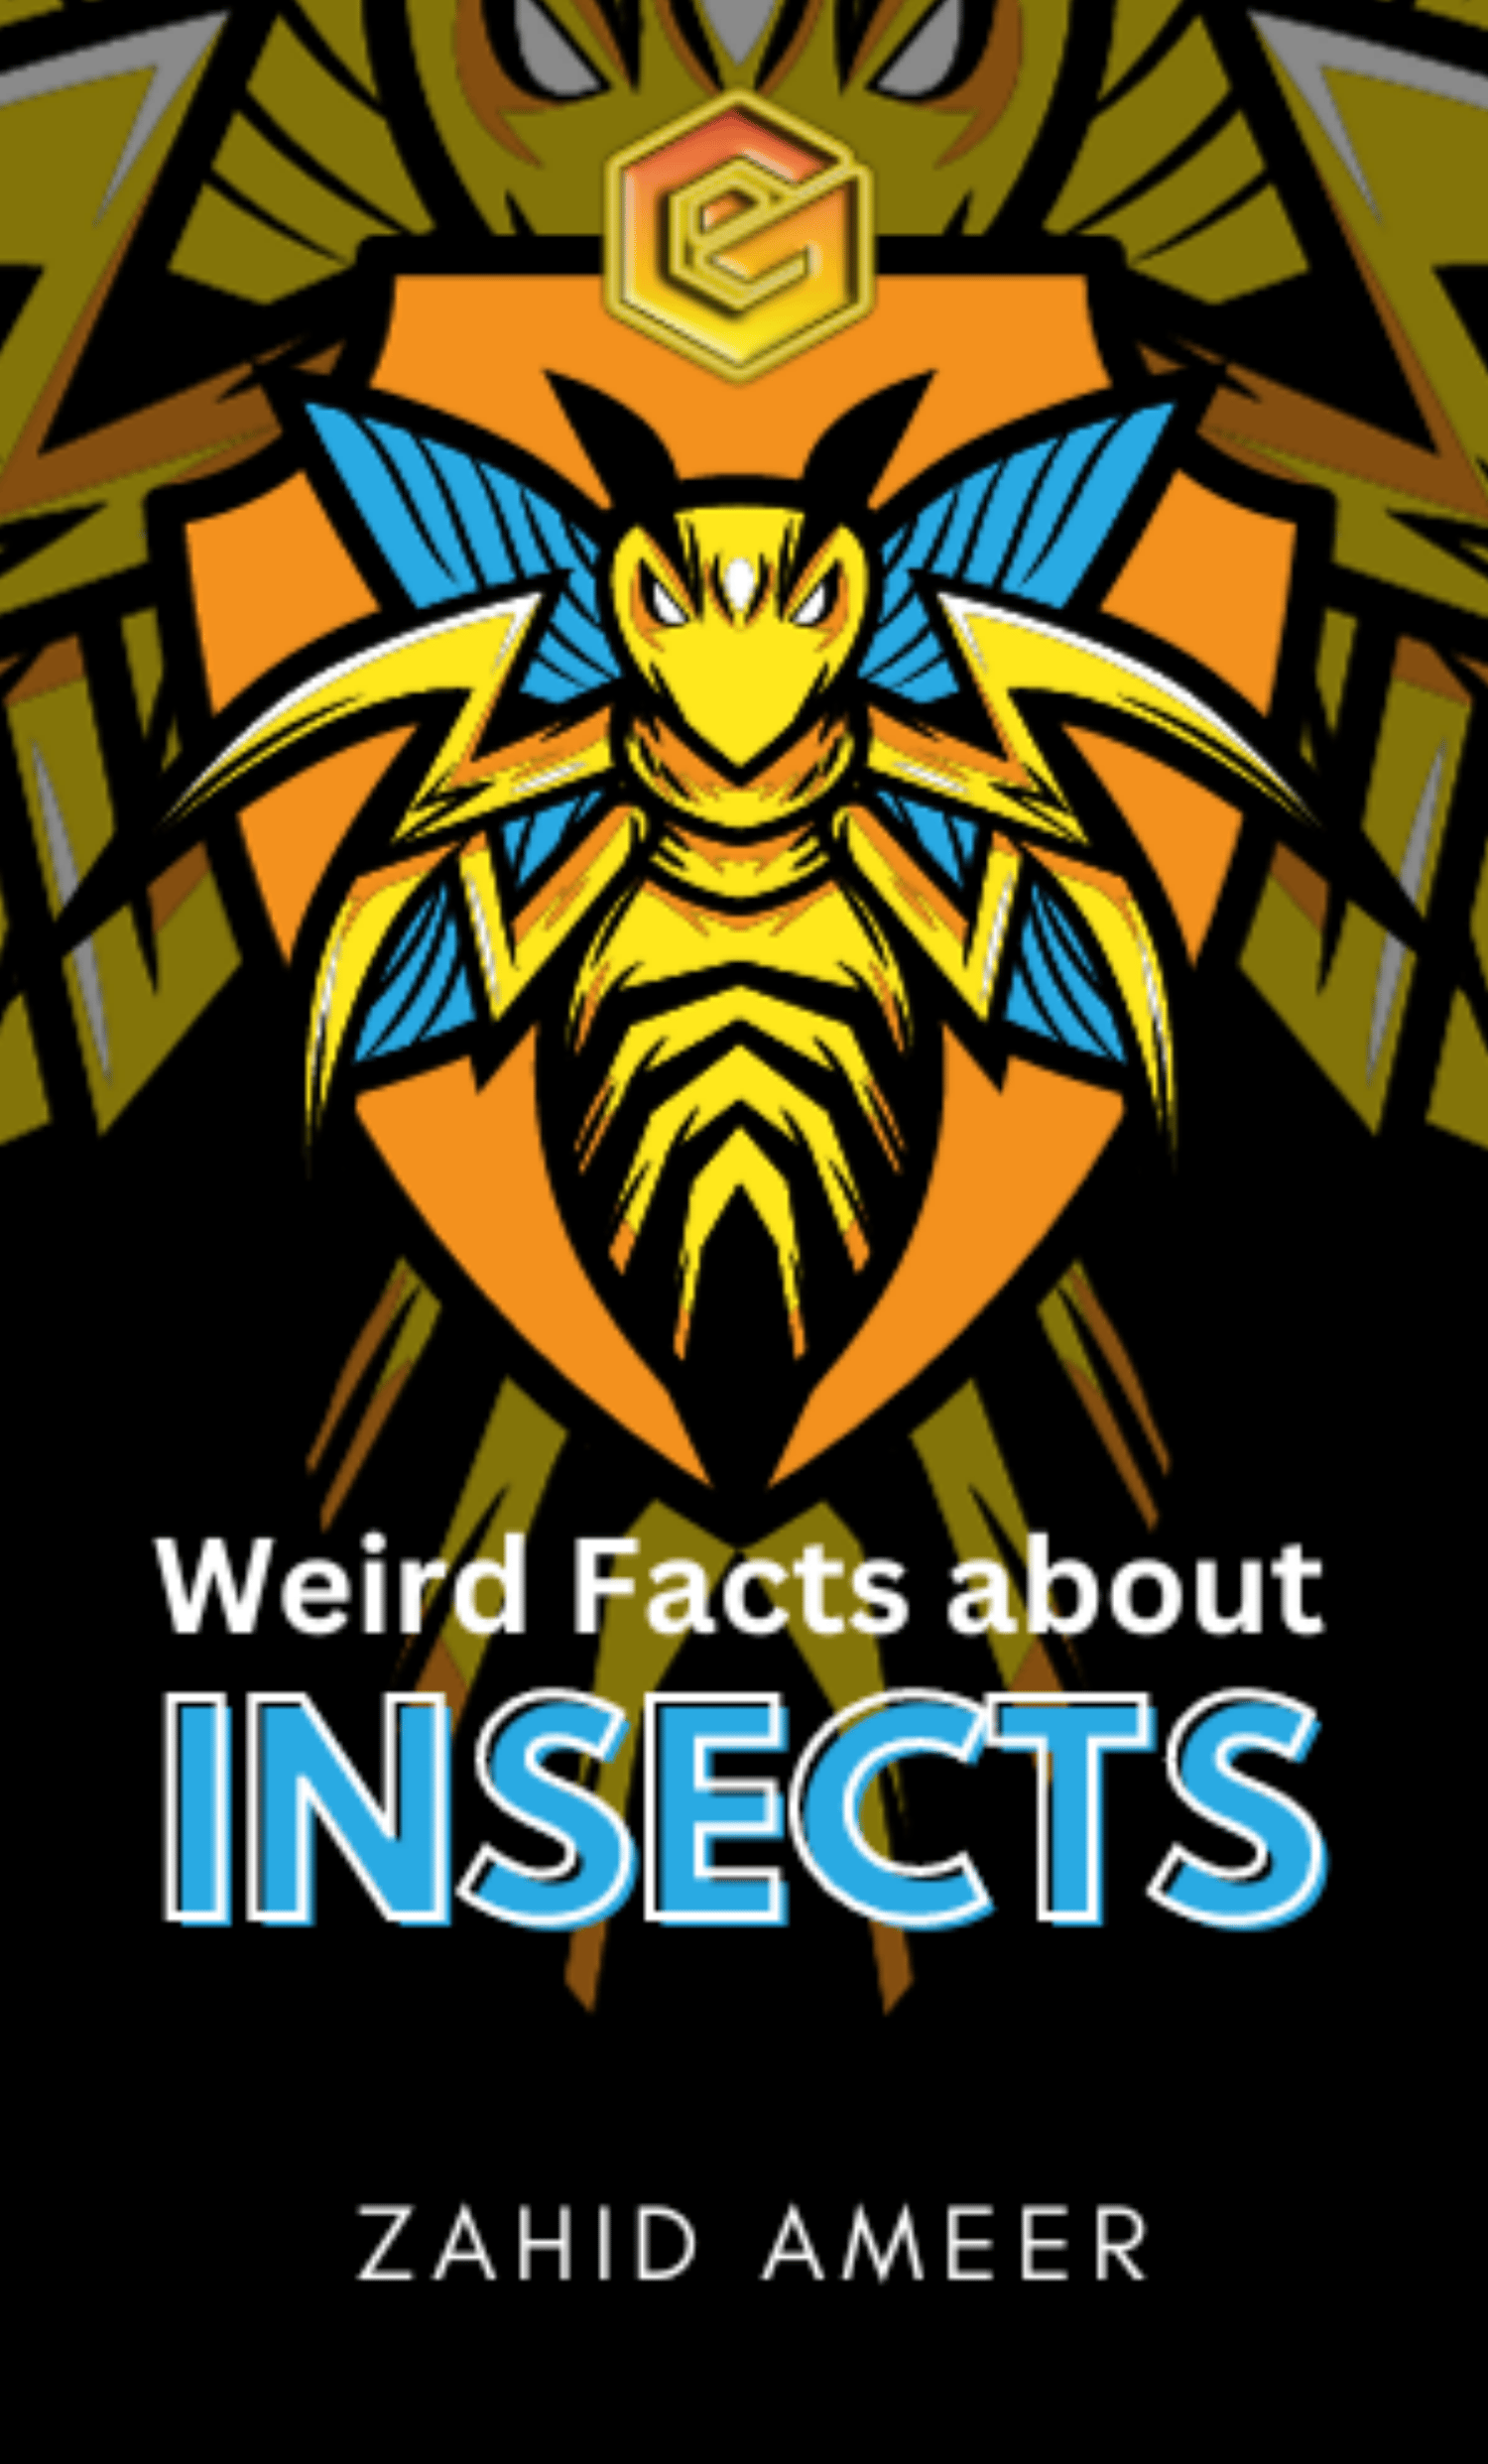 Colorful insect illustration on light background. Discover fascinating insect facts in Weird Facts about Insects eBook."